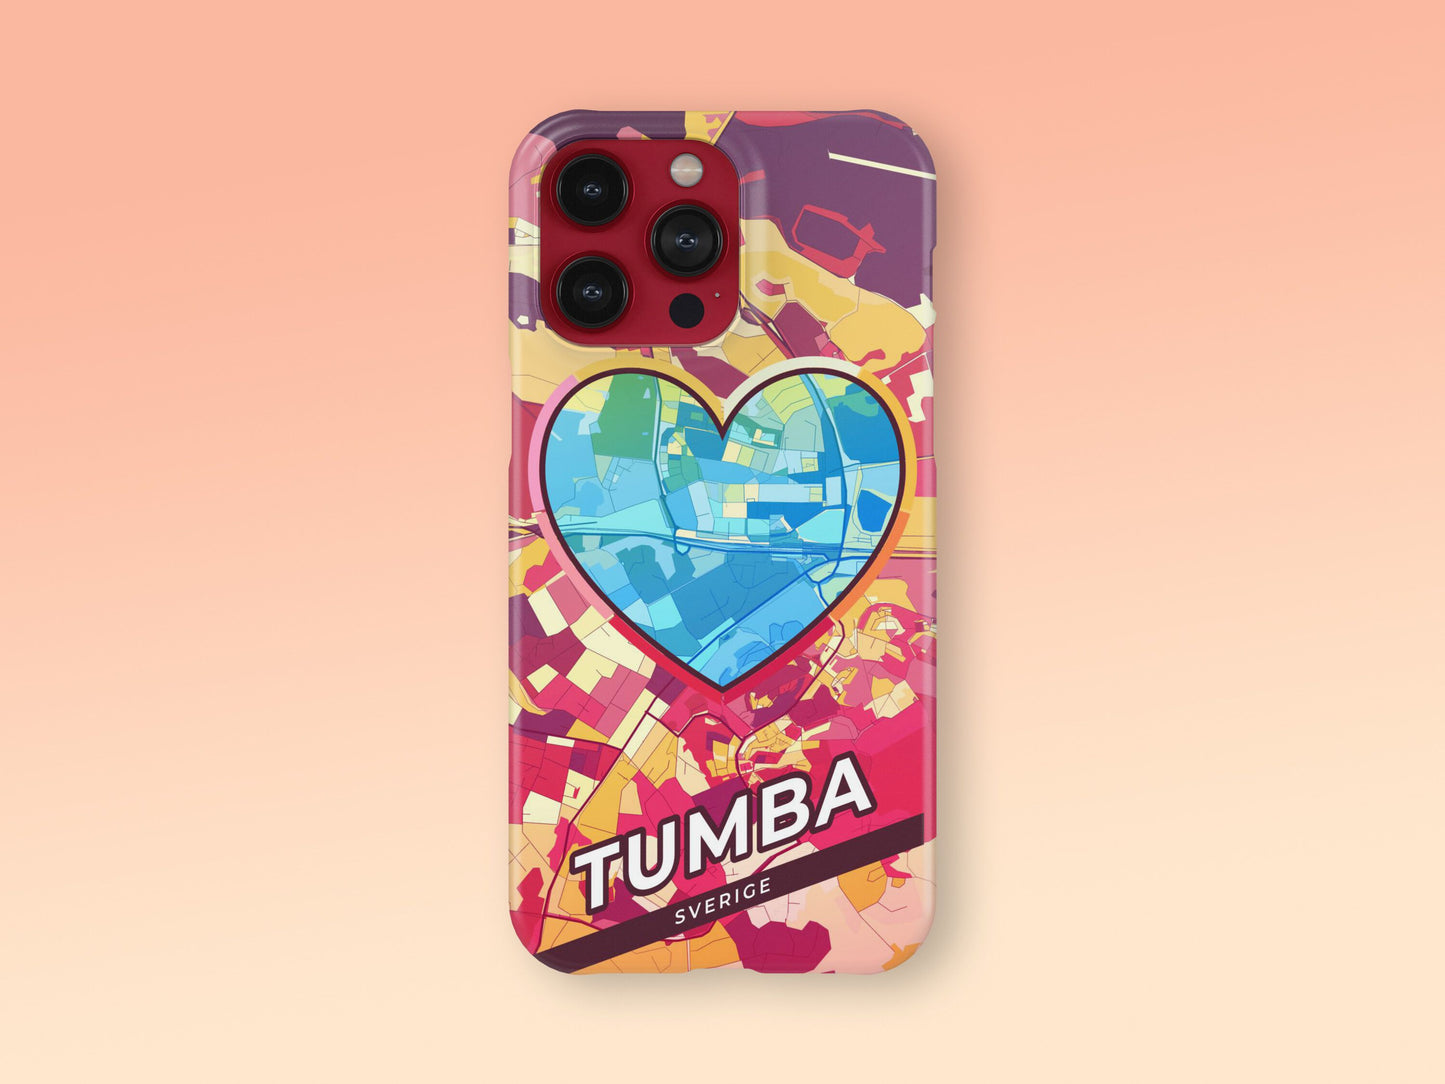 Tumba Sweden slim phone case with colorful icon 2